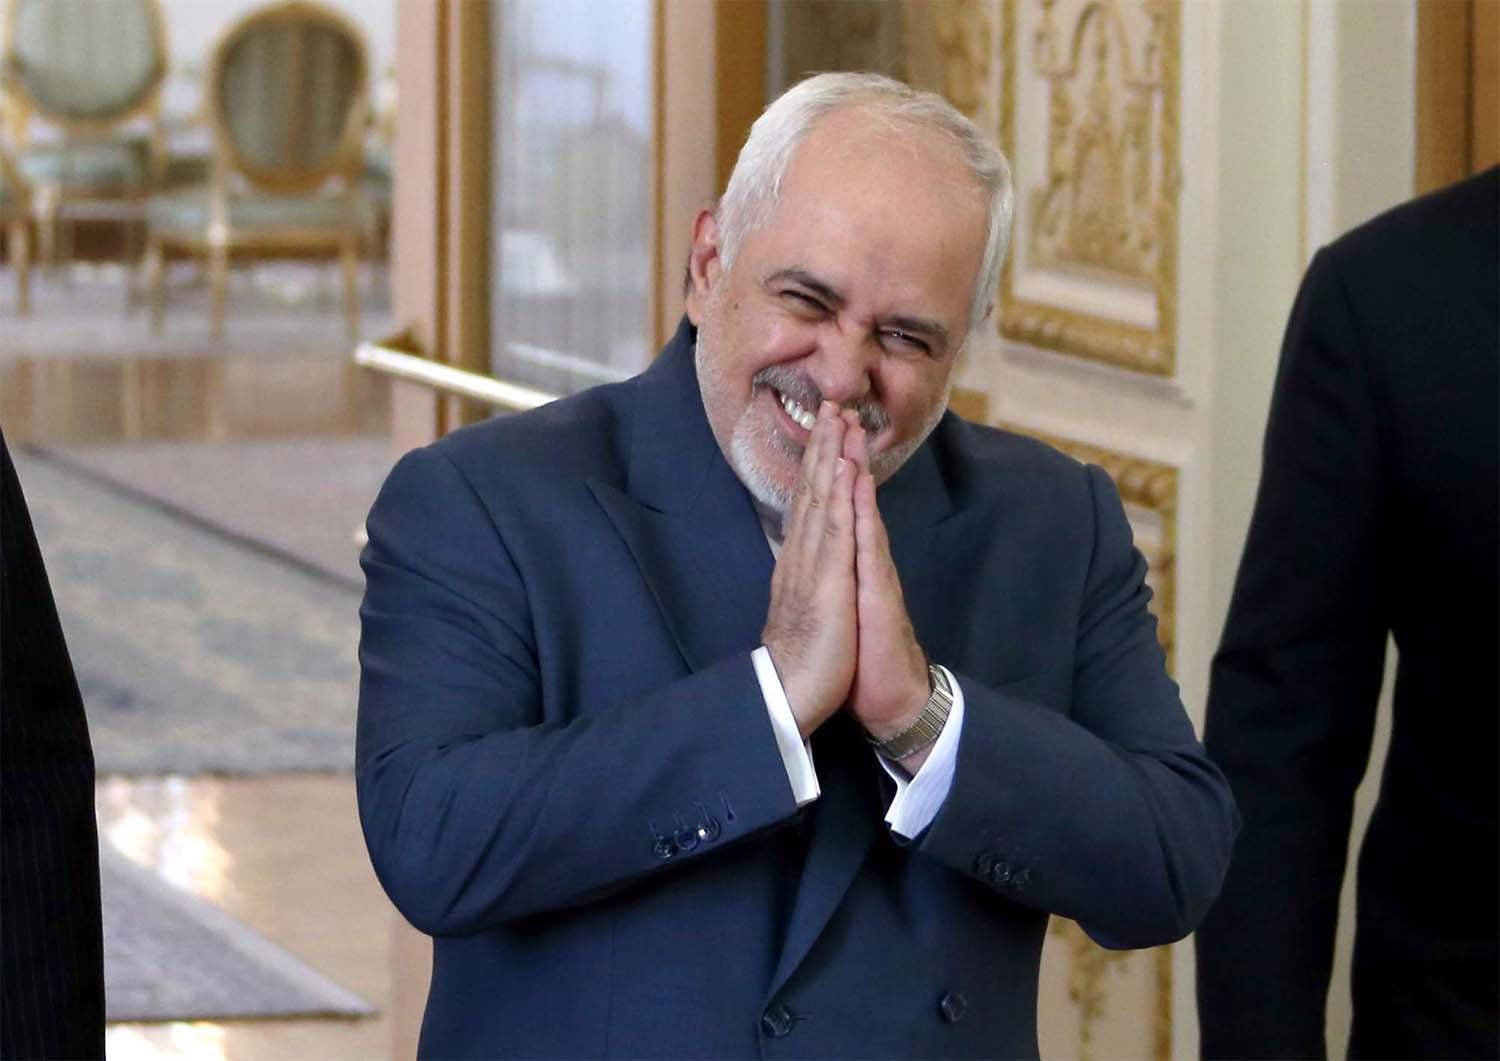 Iran’s foreign minister challenged the US president to return to the nuclear deal that Washington abandoned in 2018 (Getty)